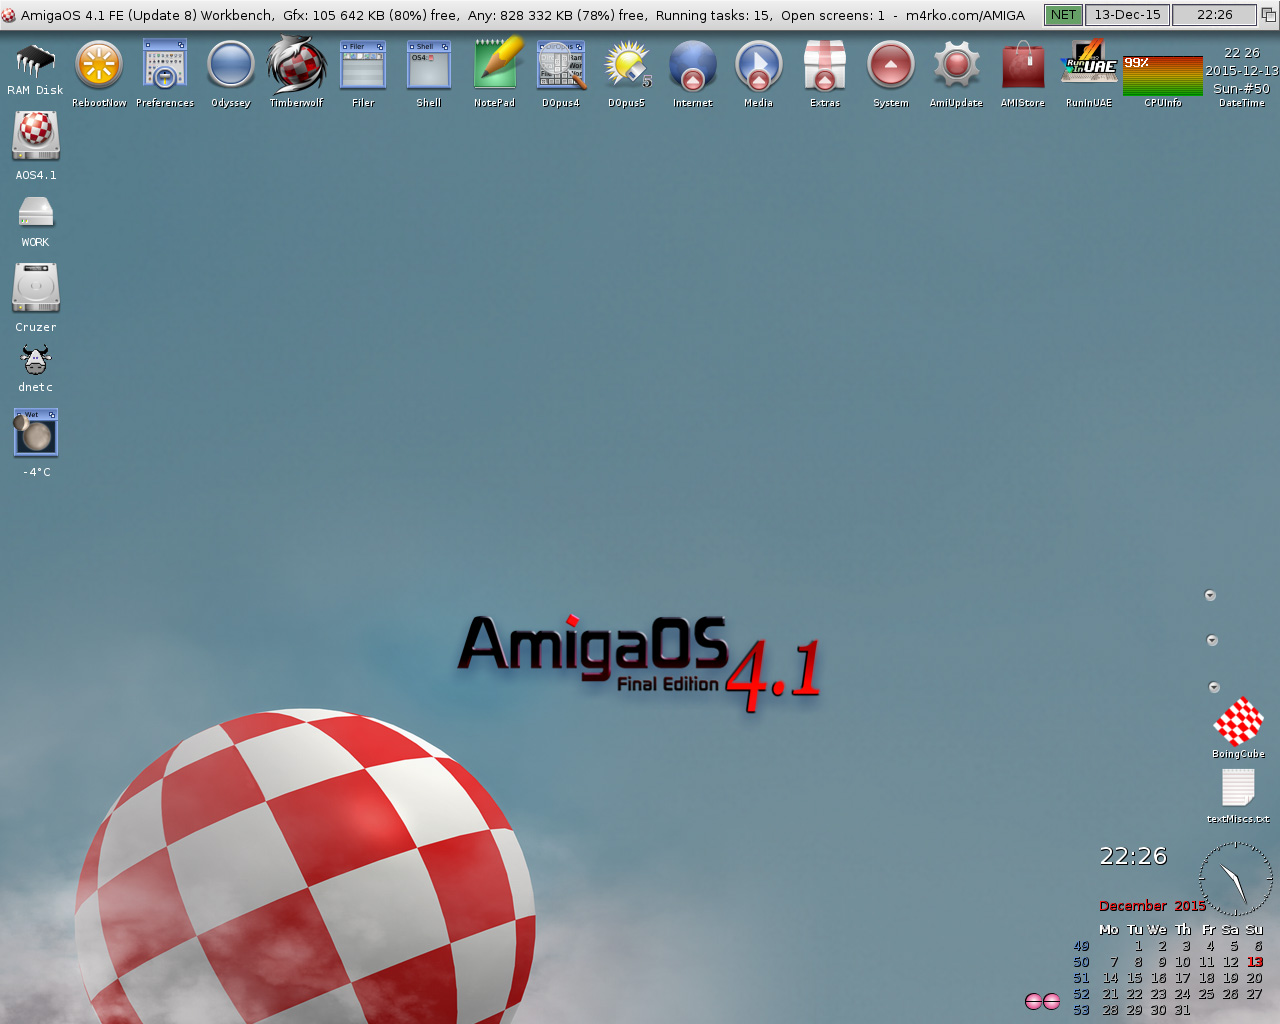 Docky at the top-AmigaOS 4.1 FE-Update 8-Workbench